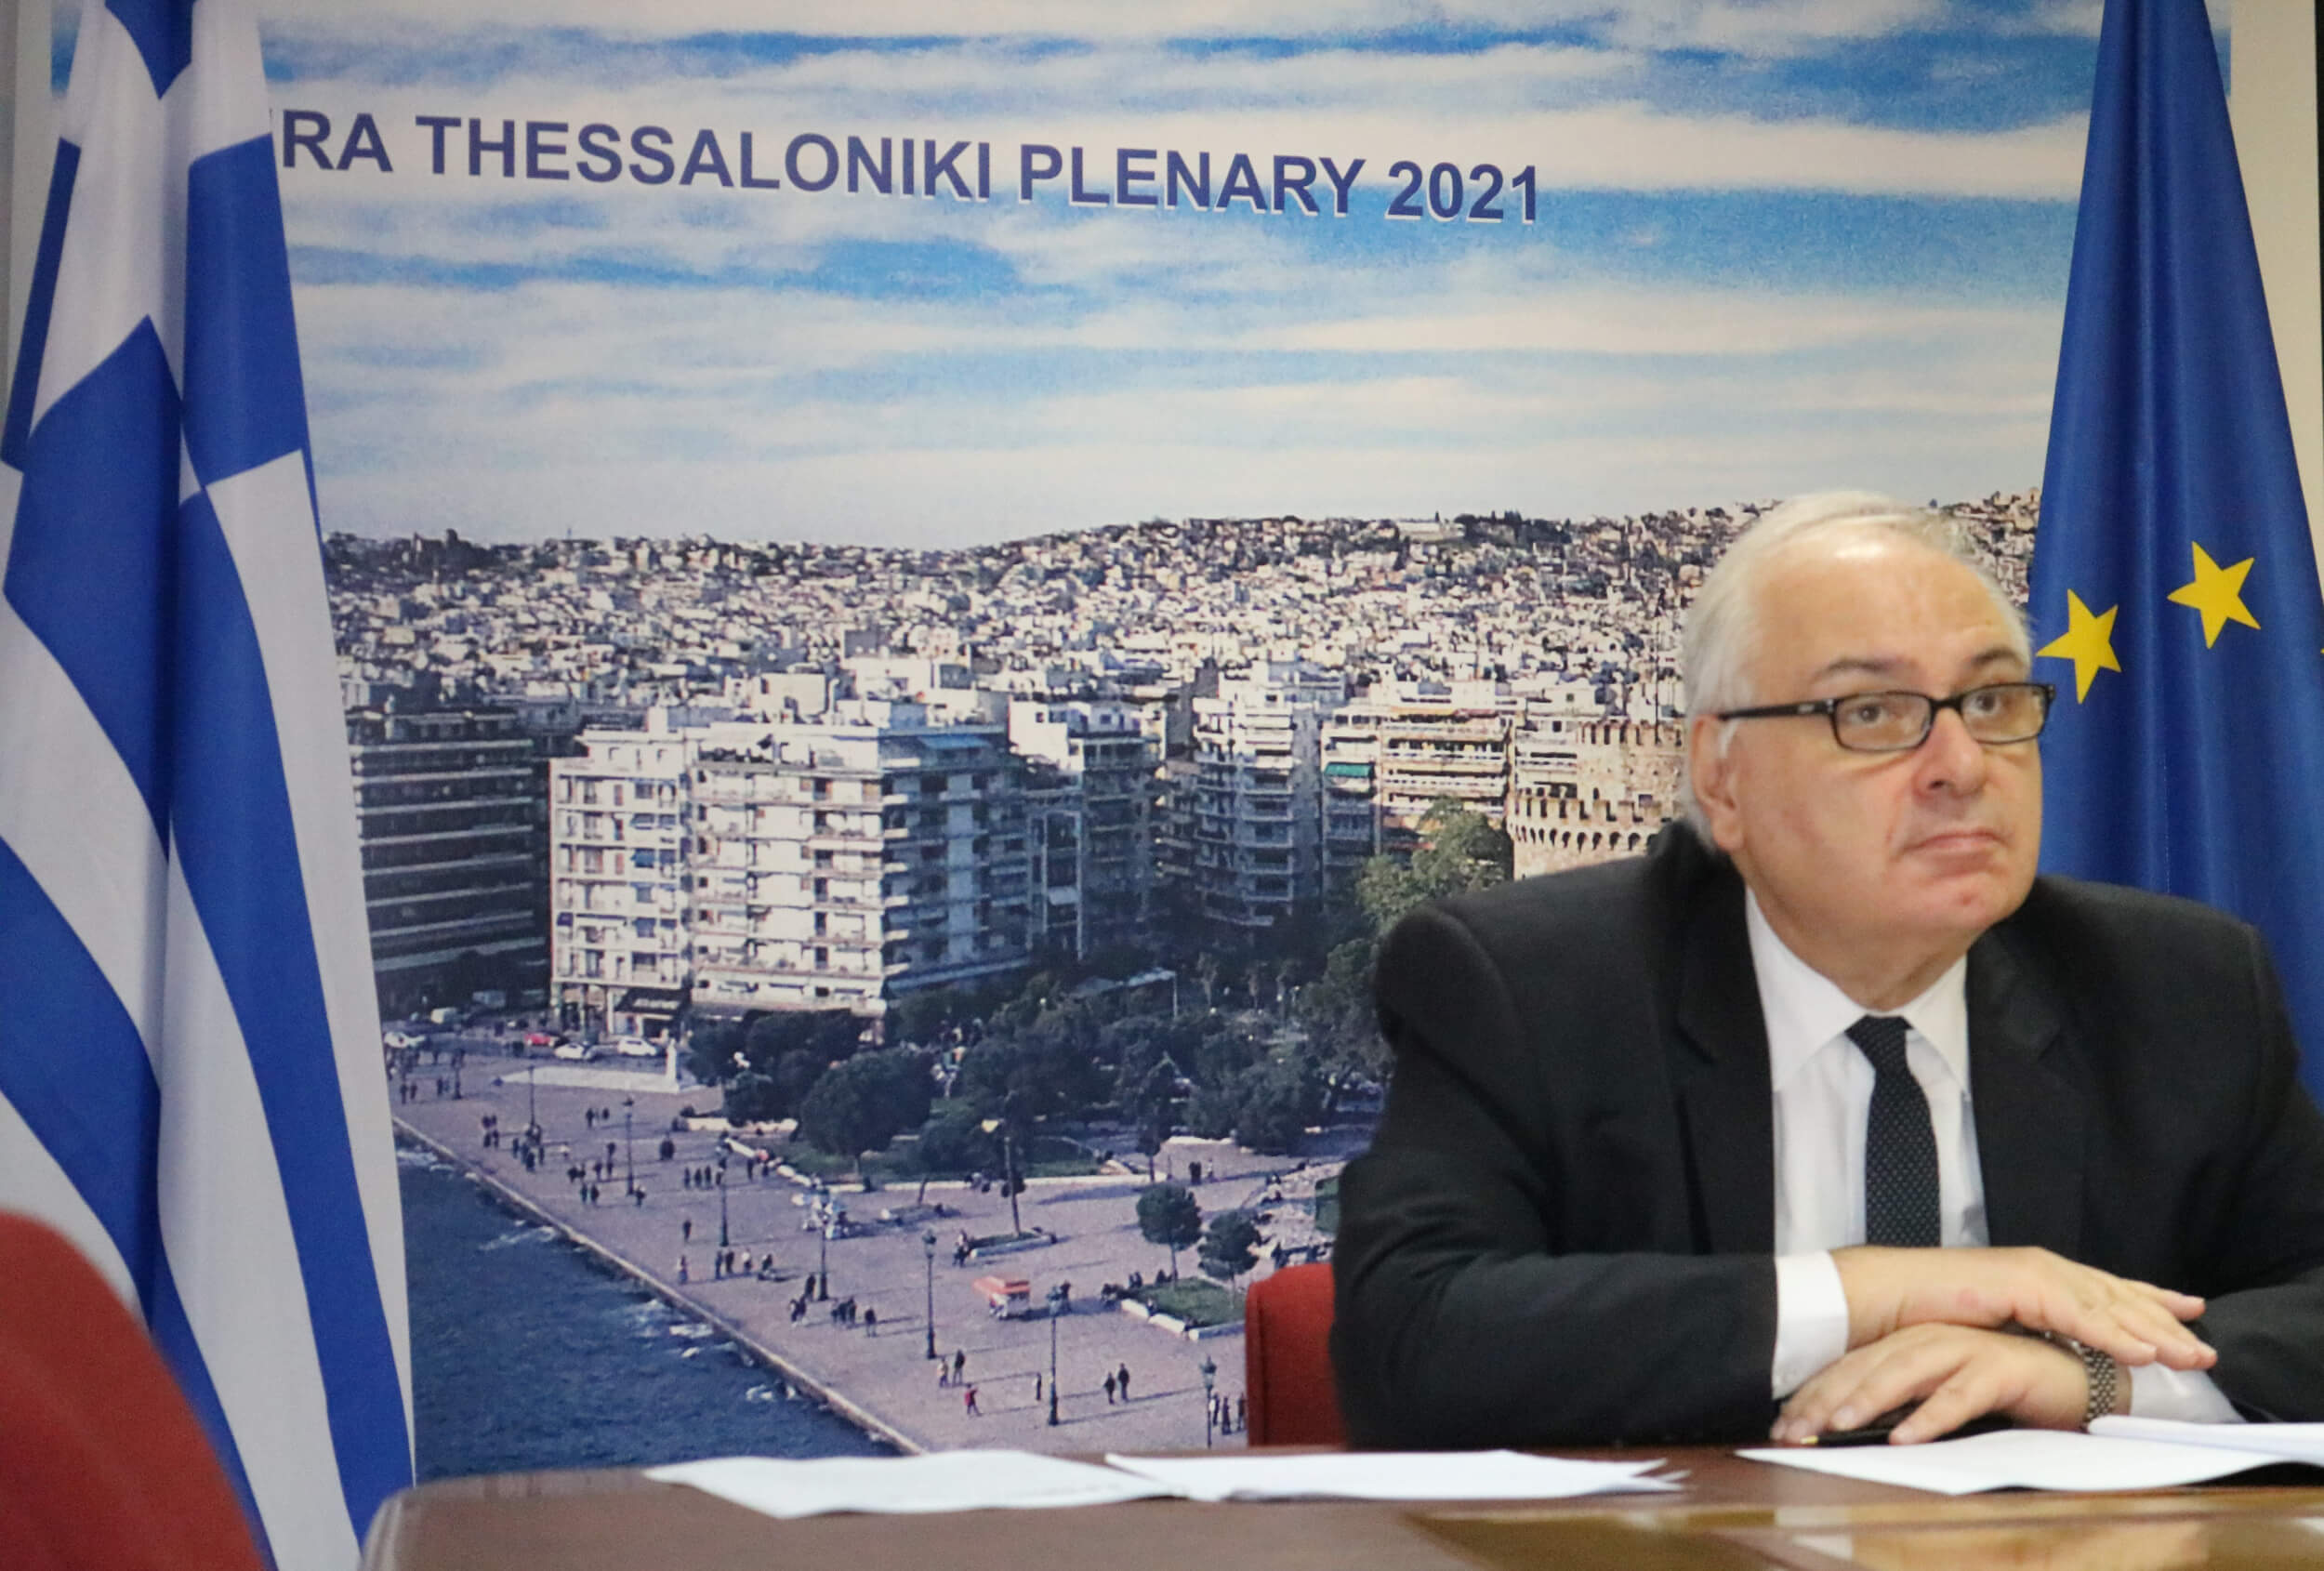 The Permanent Office of the IHRA sums up the successful conclusion of IHRA second biannual plenary meetings 2021 in Thessaloniki